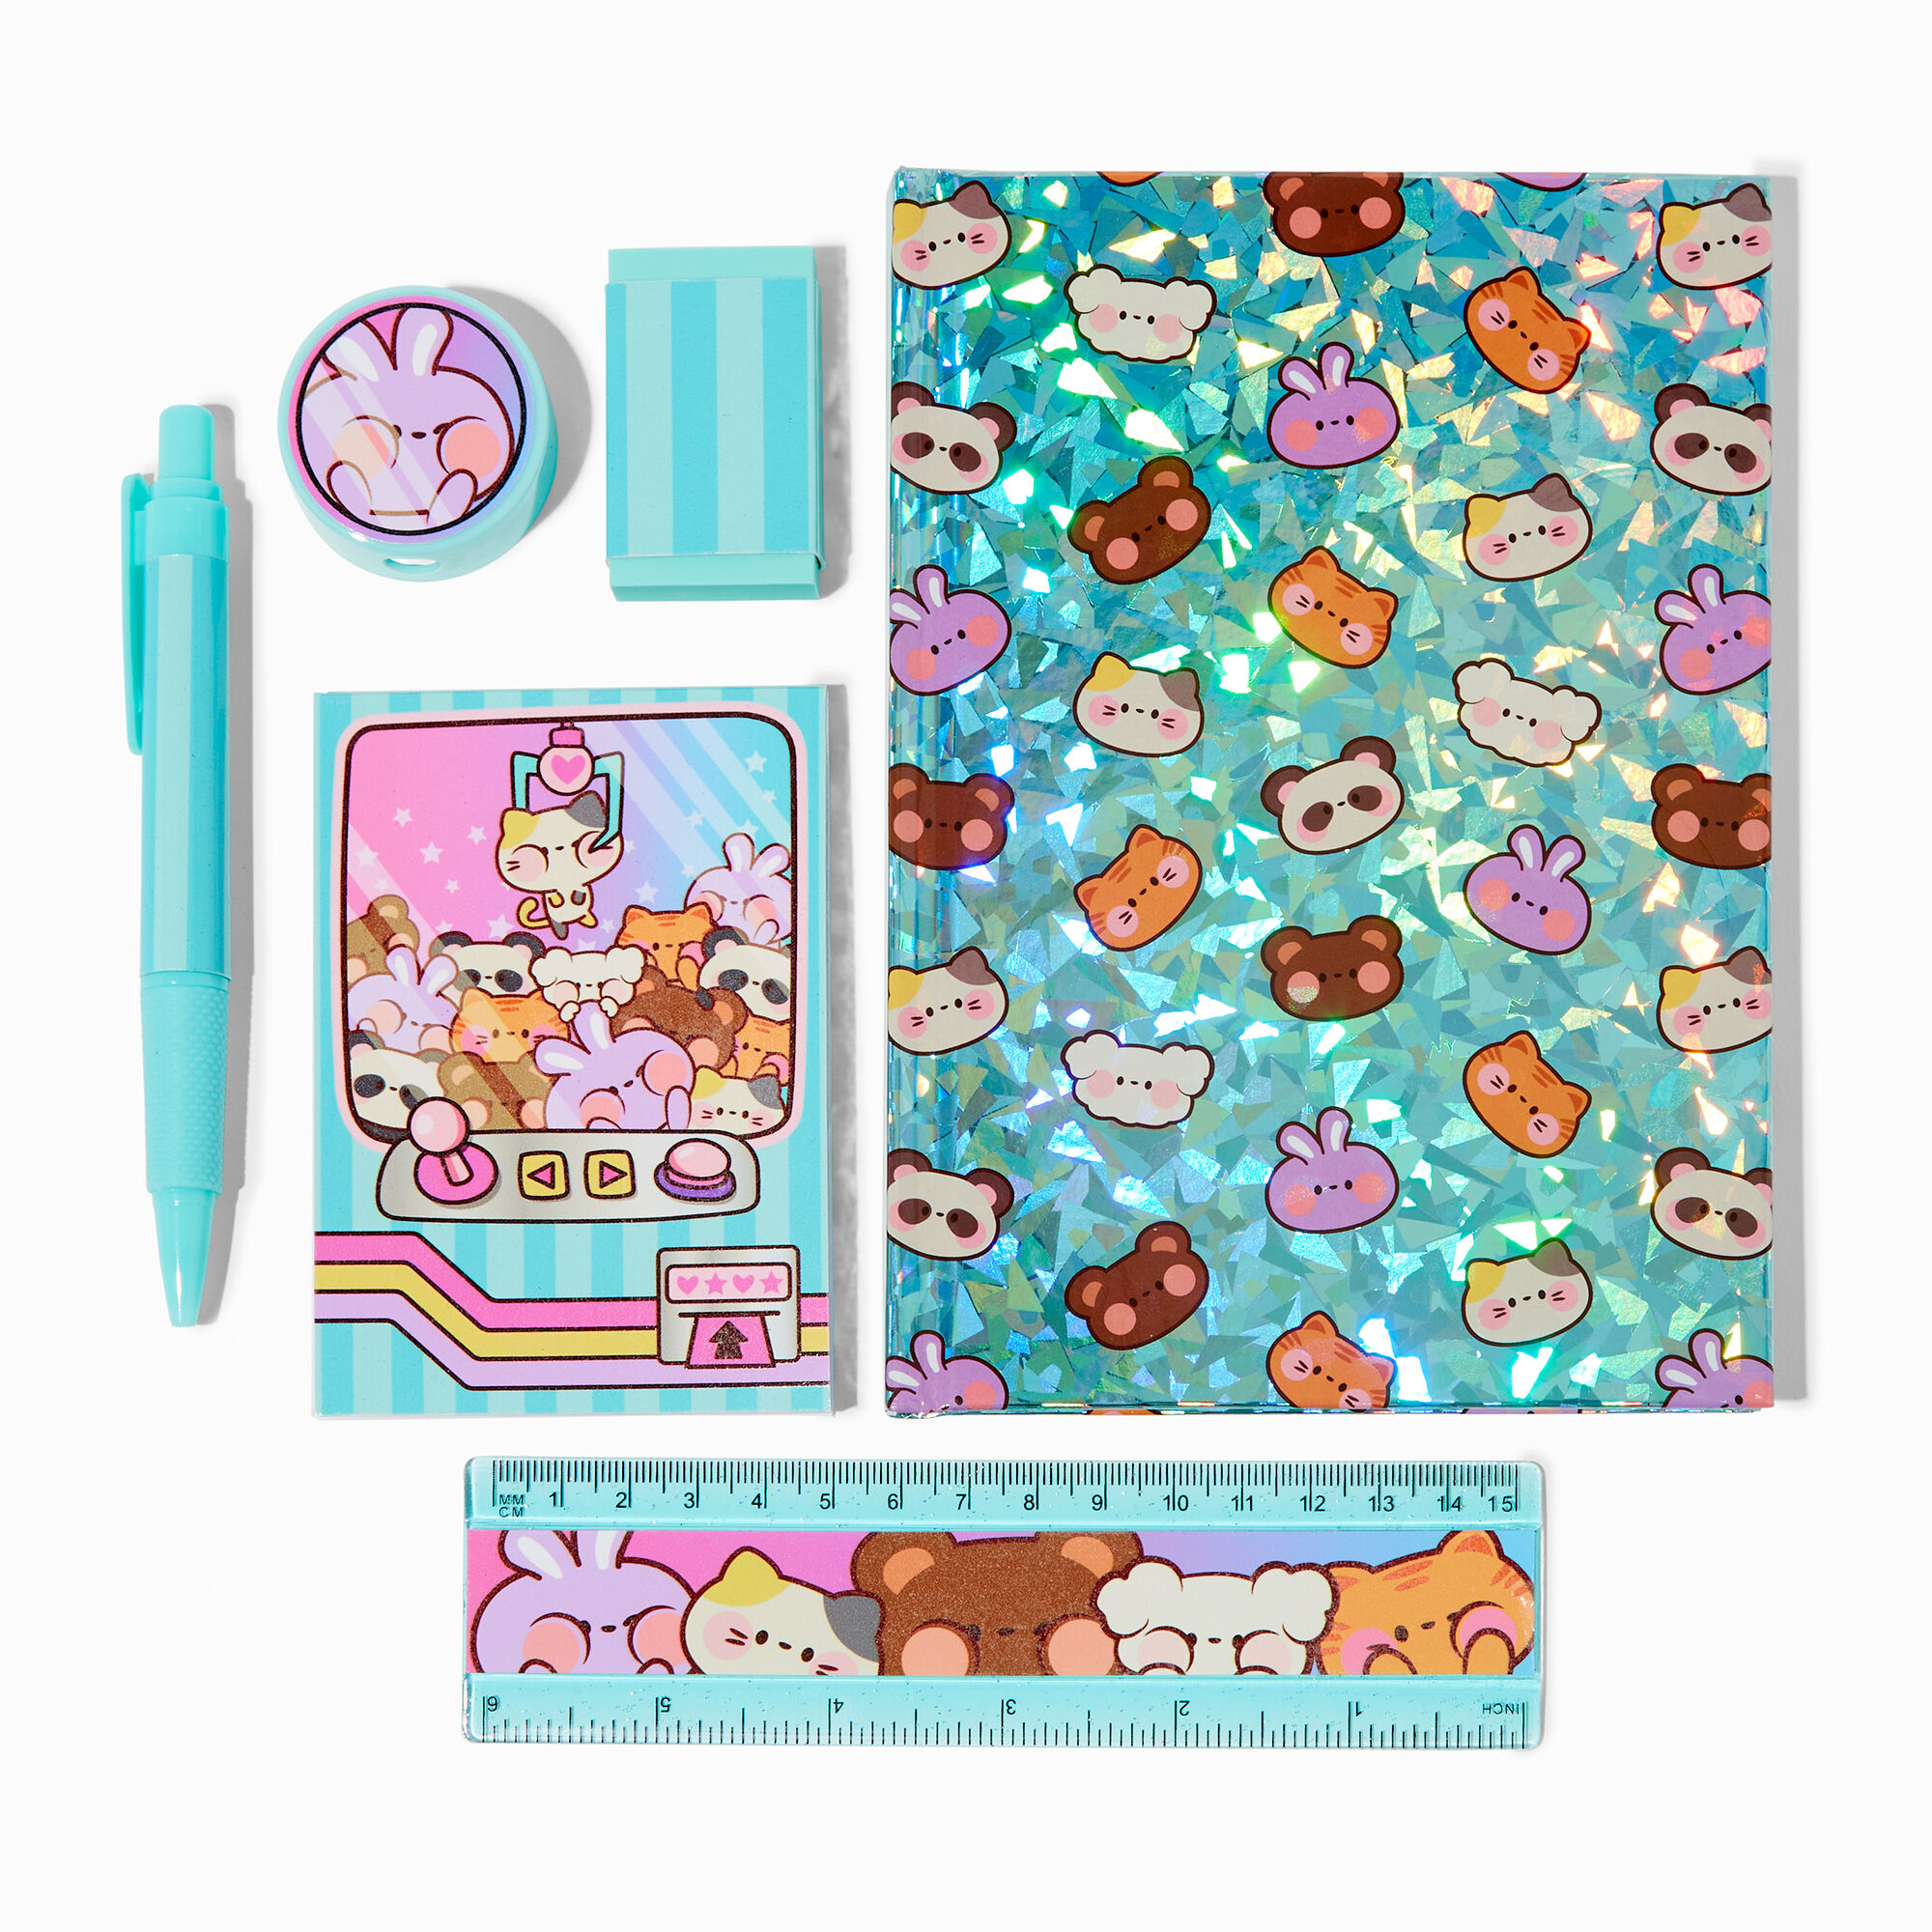 The Best Cute Stationery Sets That You Can Buy on  – StyleCaster